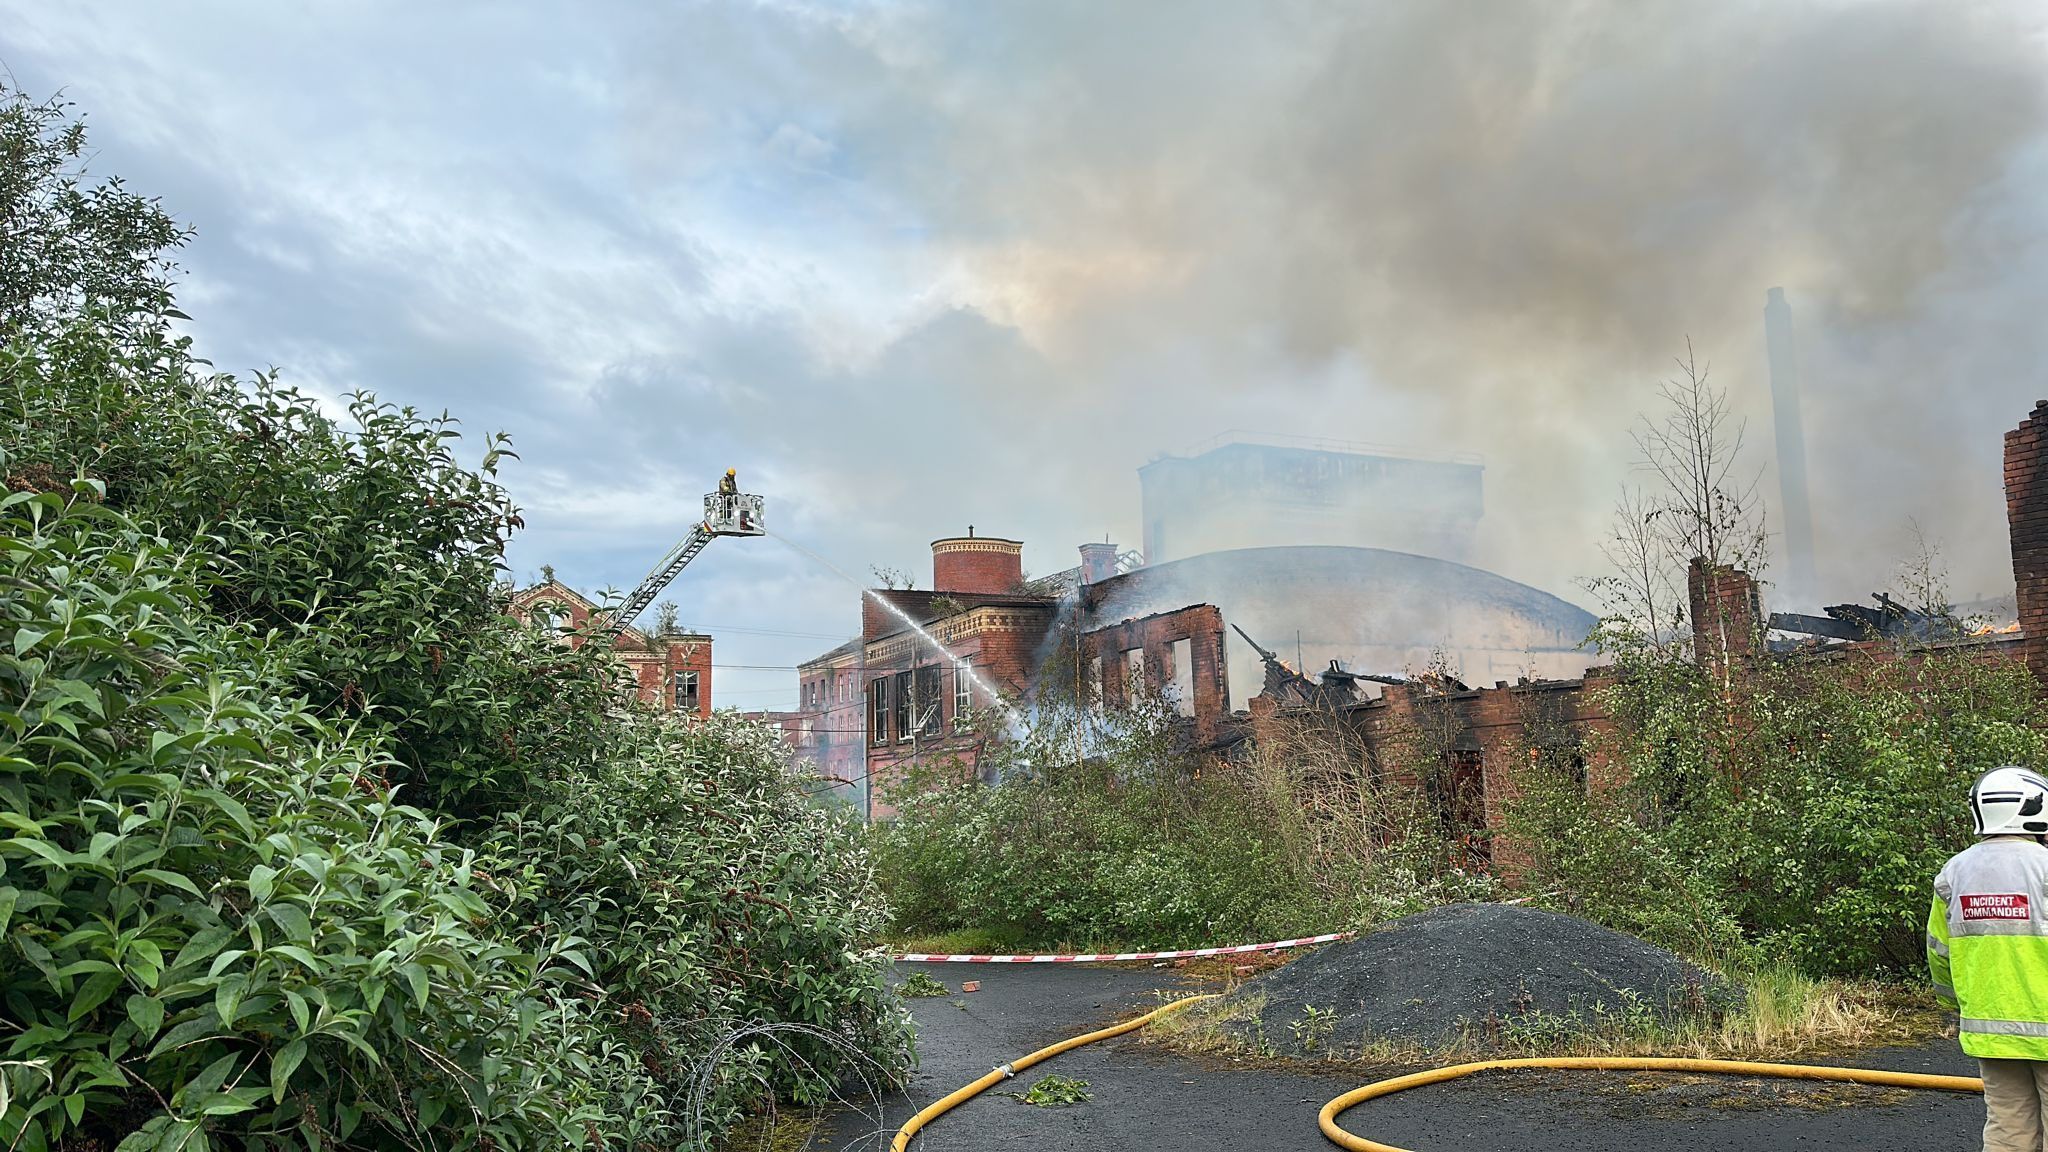 The fire at Hilden Mill being put out 